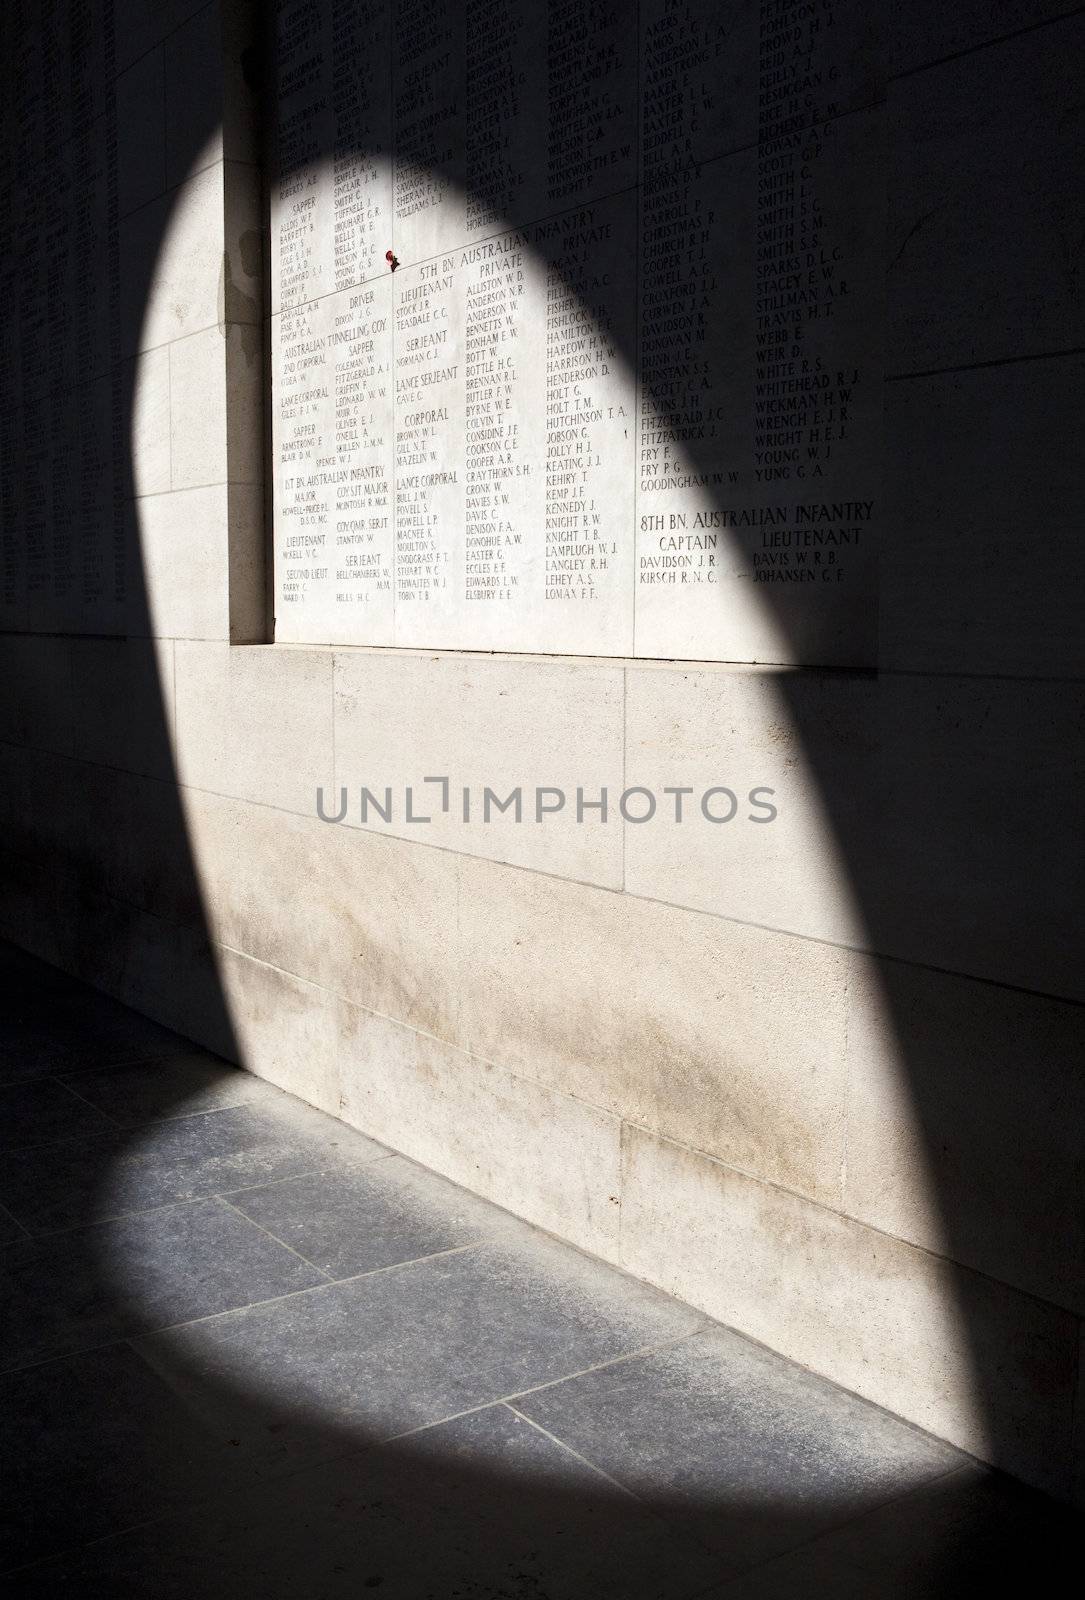 Names of fallen war heroes from the first World War on the Menin Gate in Ypres.  The Menin Gate is dedicated to the British and Commonwealth soldiers who were killed in the Ypres Salient of World War I and whose graves are unknown.